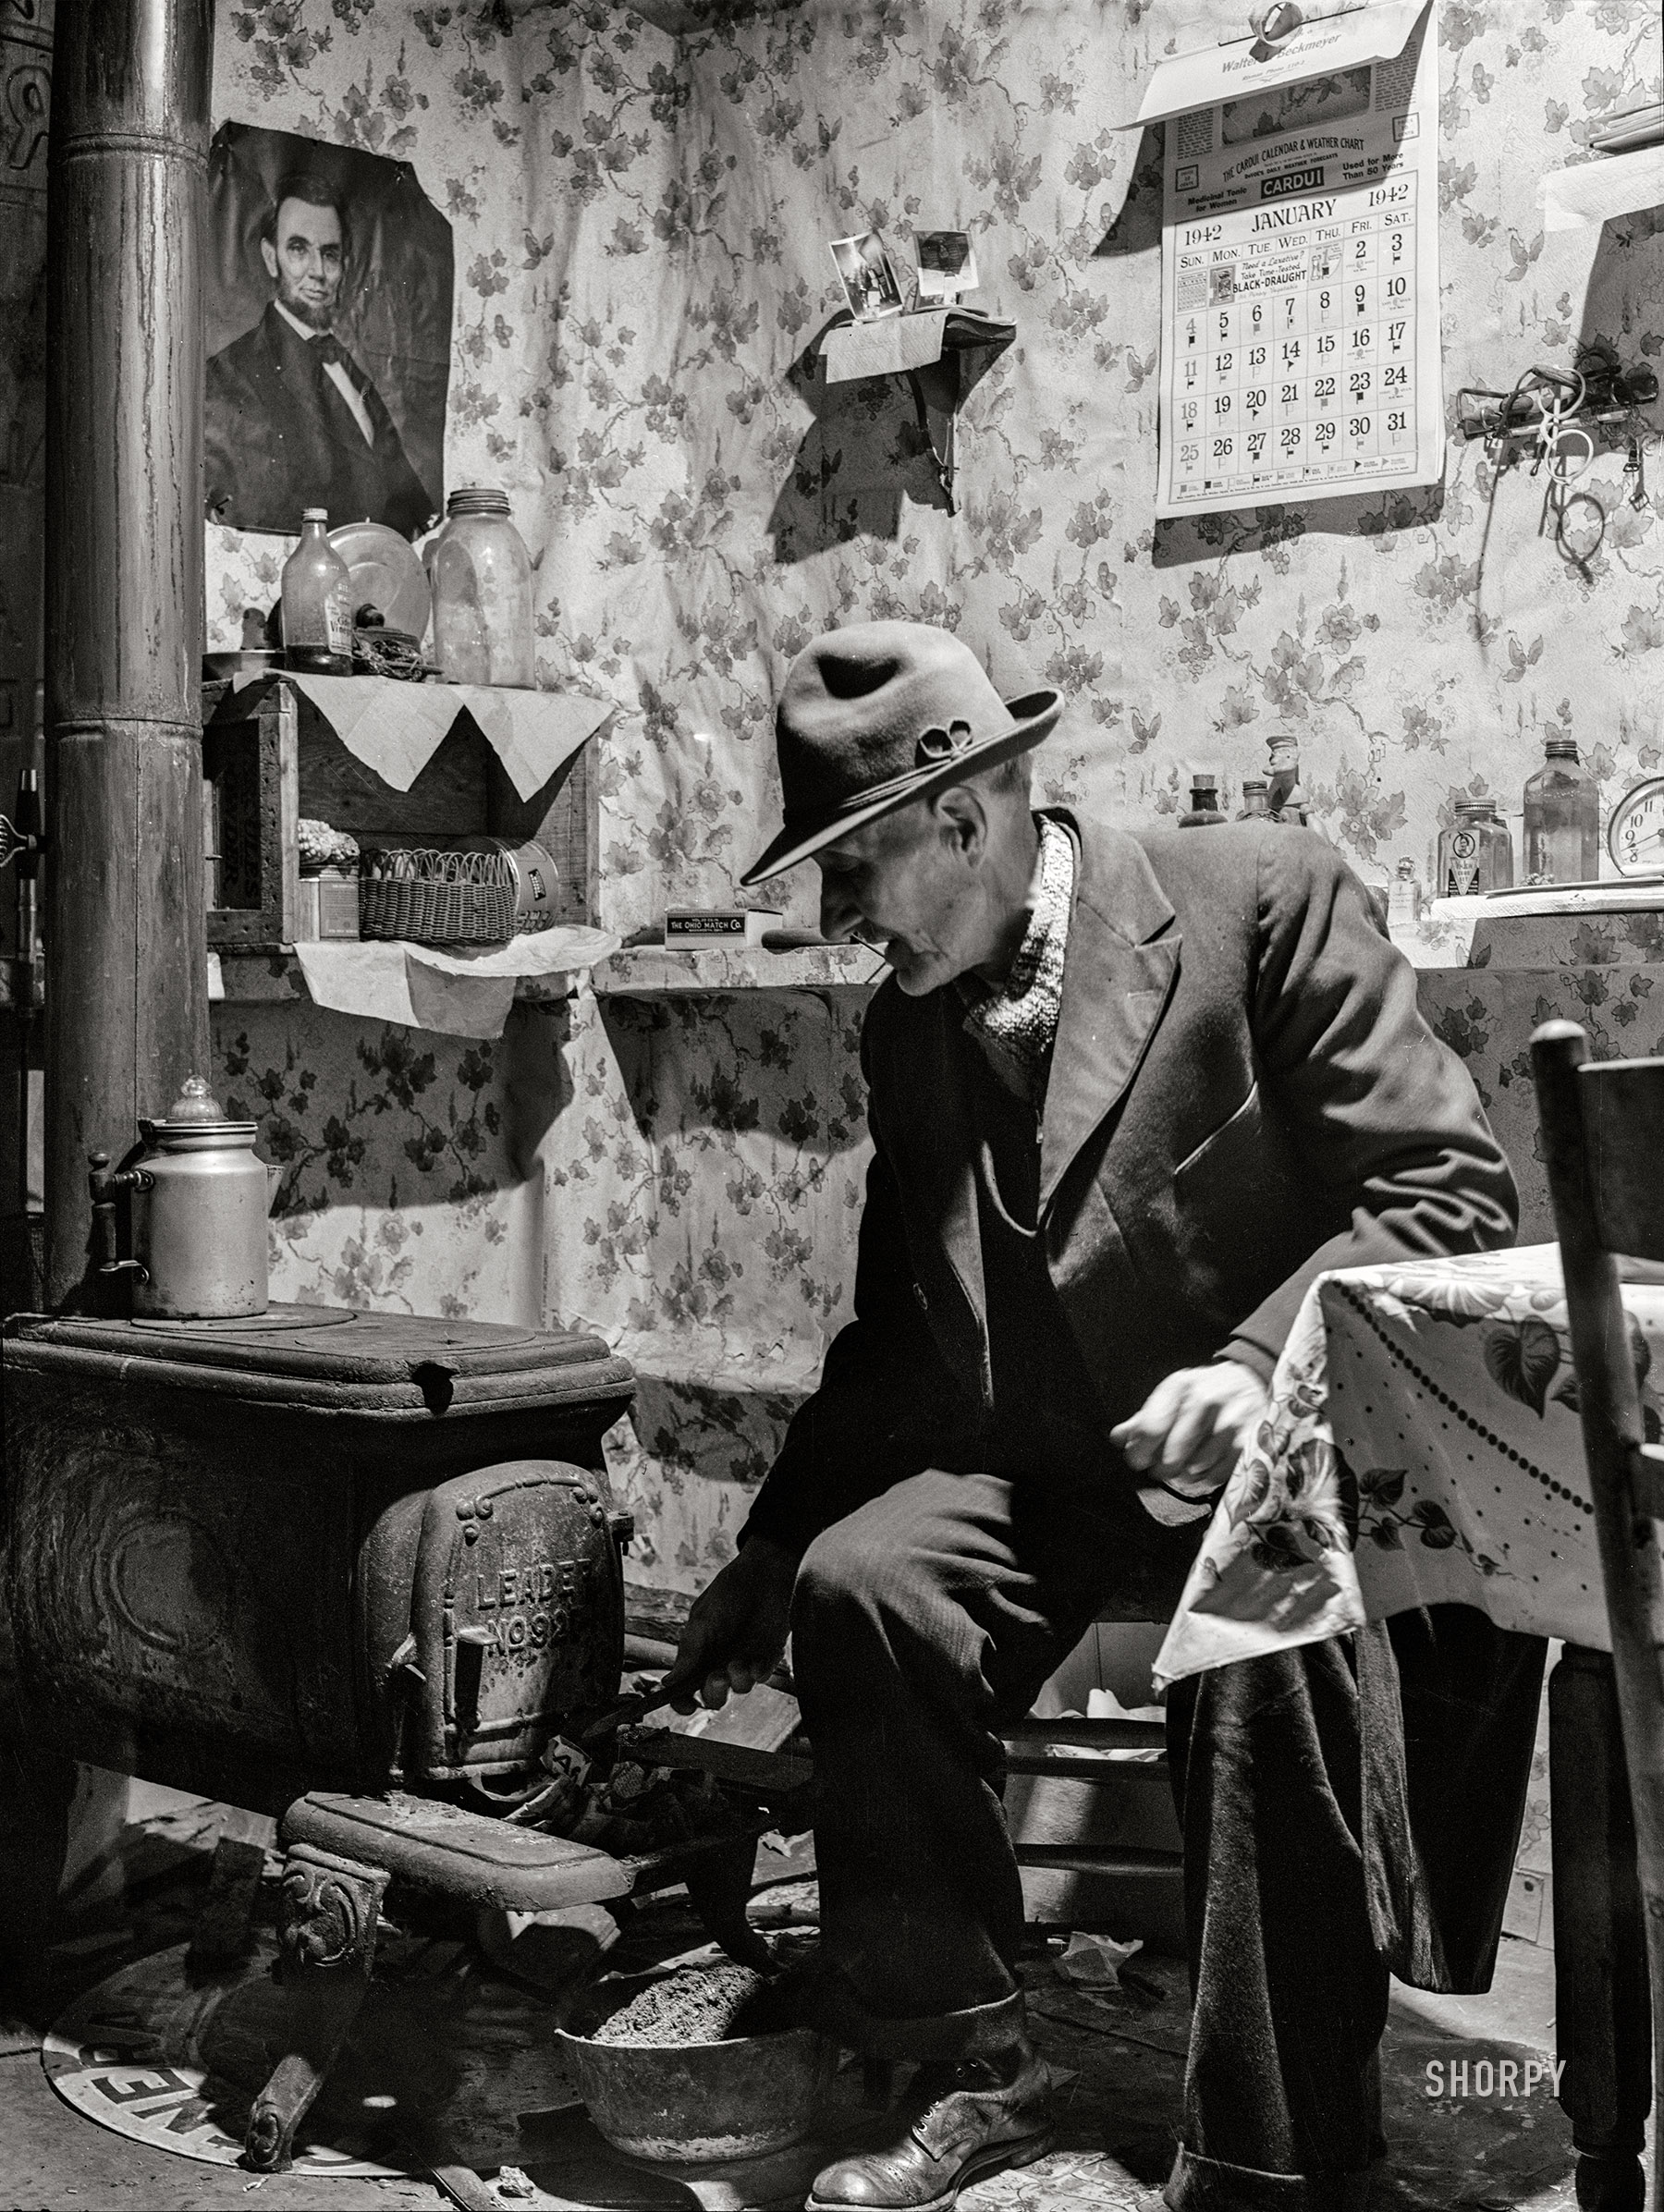 January 1942. Washington County, Illinois. "Billy Williams, 65-year-old squatter, living in shack he built himself." Medium format acetate negative by John Vachon. View full size.